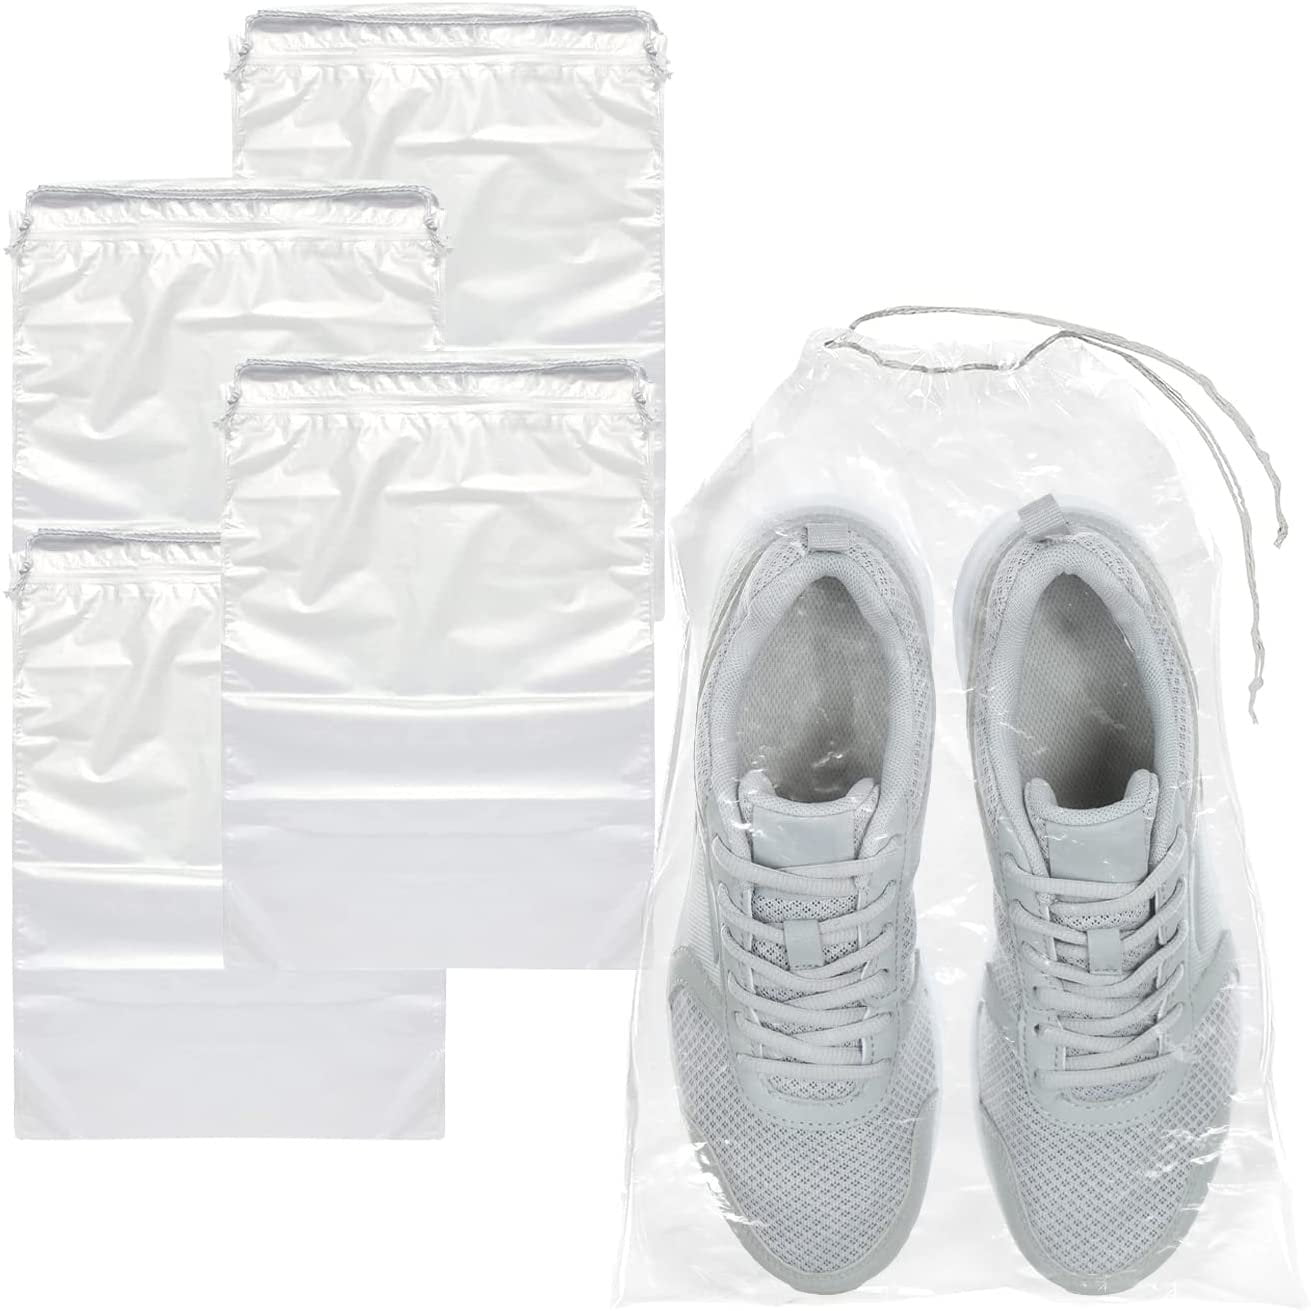 Waterproof Portable Storage for Shoes Sneakers Pack of 100 Clear Plastic 2 mil Pouches with Drawstring Closures for Packing and Storing Boots PUREVACY Travel Shoe Bags 12 x 18 For Men & Women 